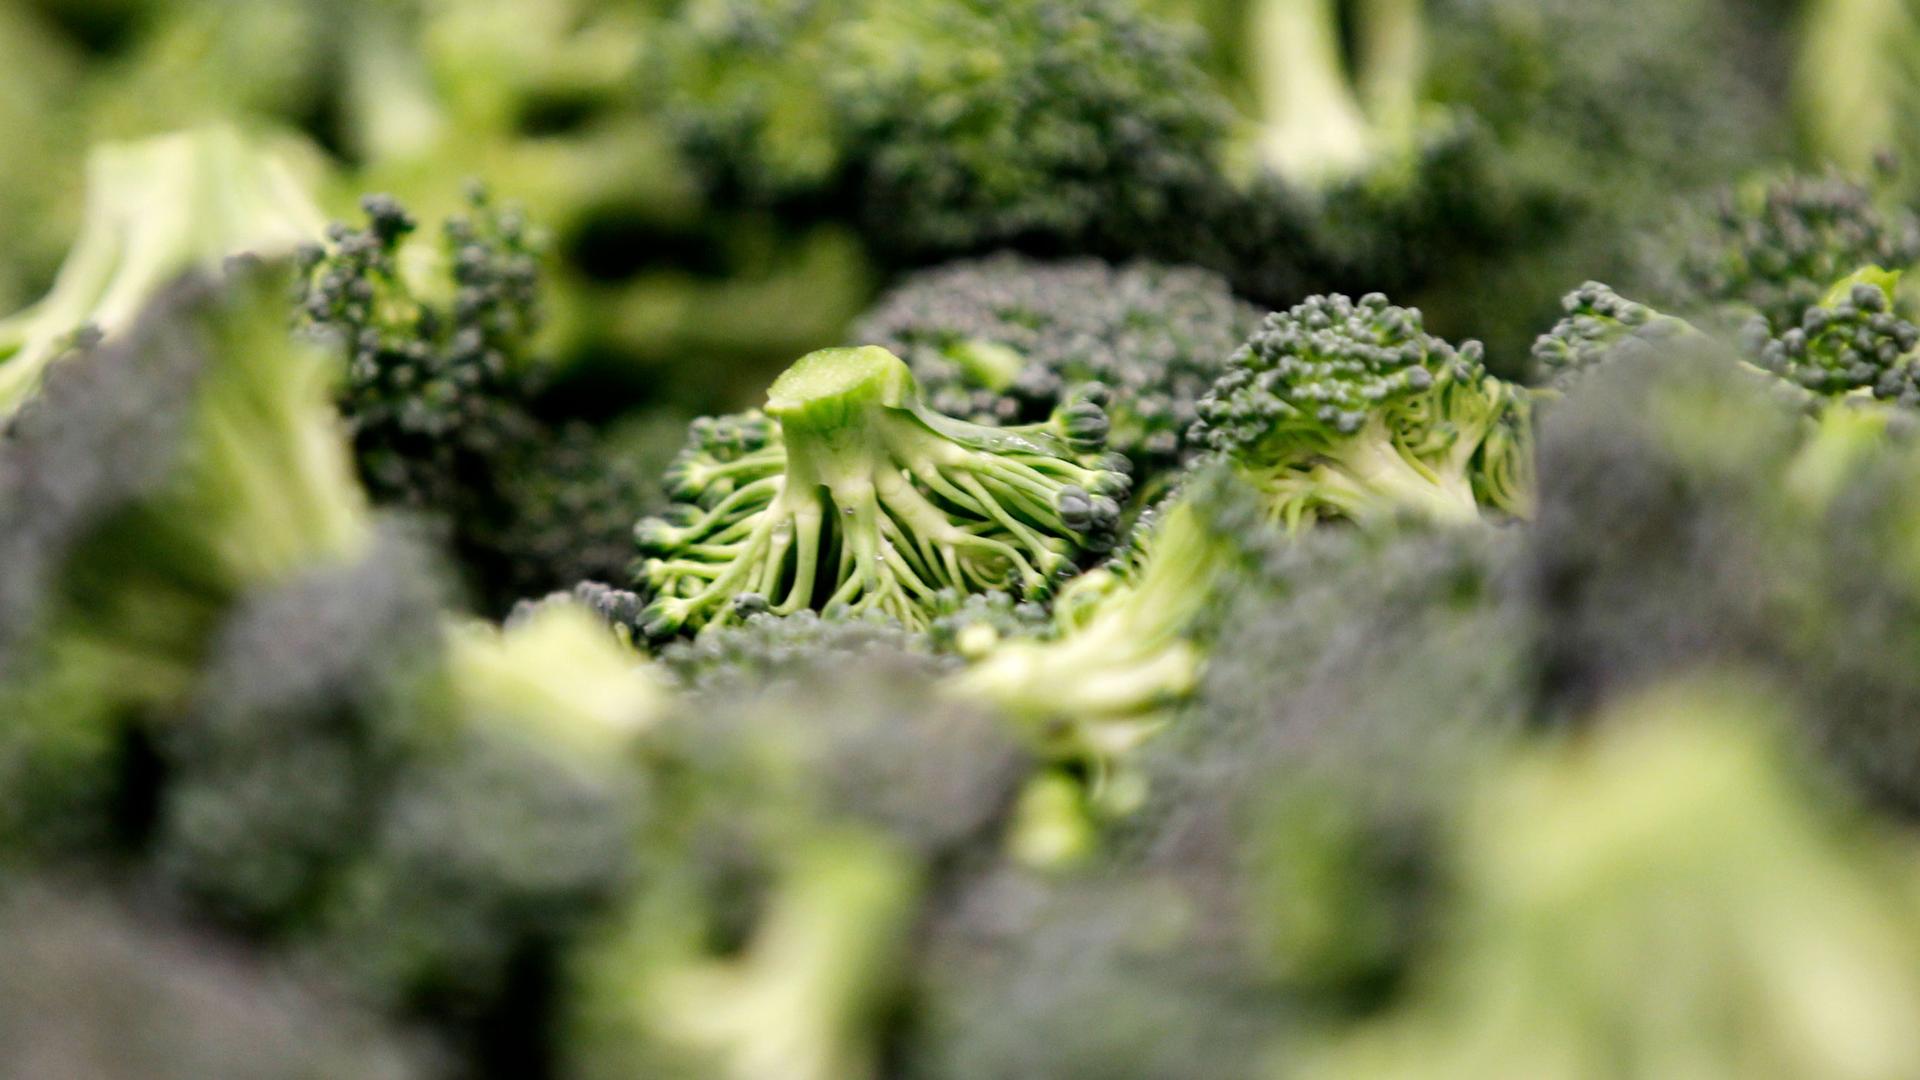 A close up of broccoli crowns